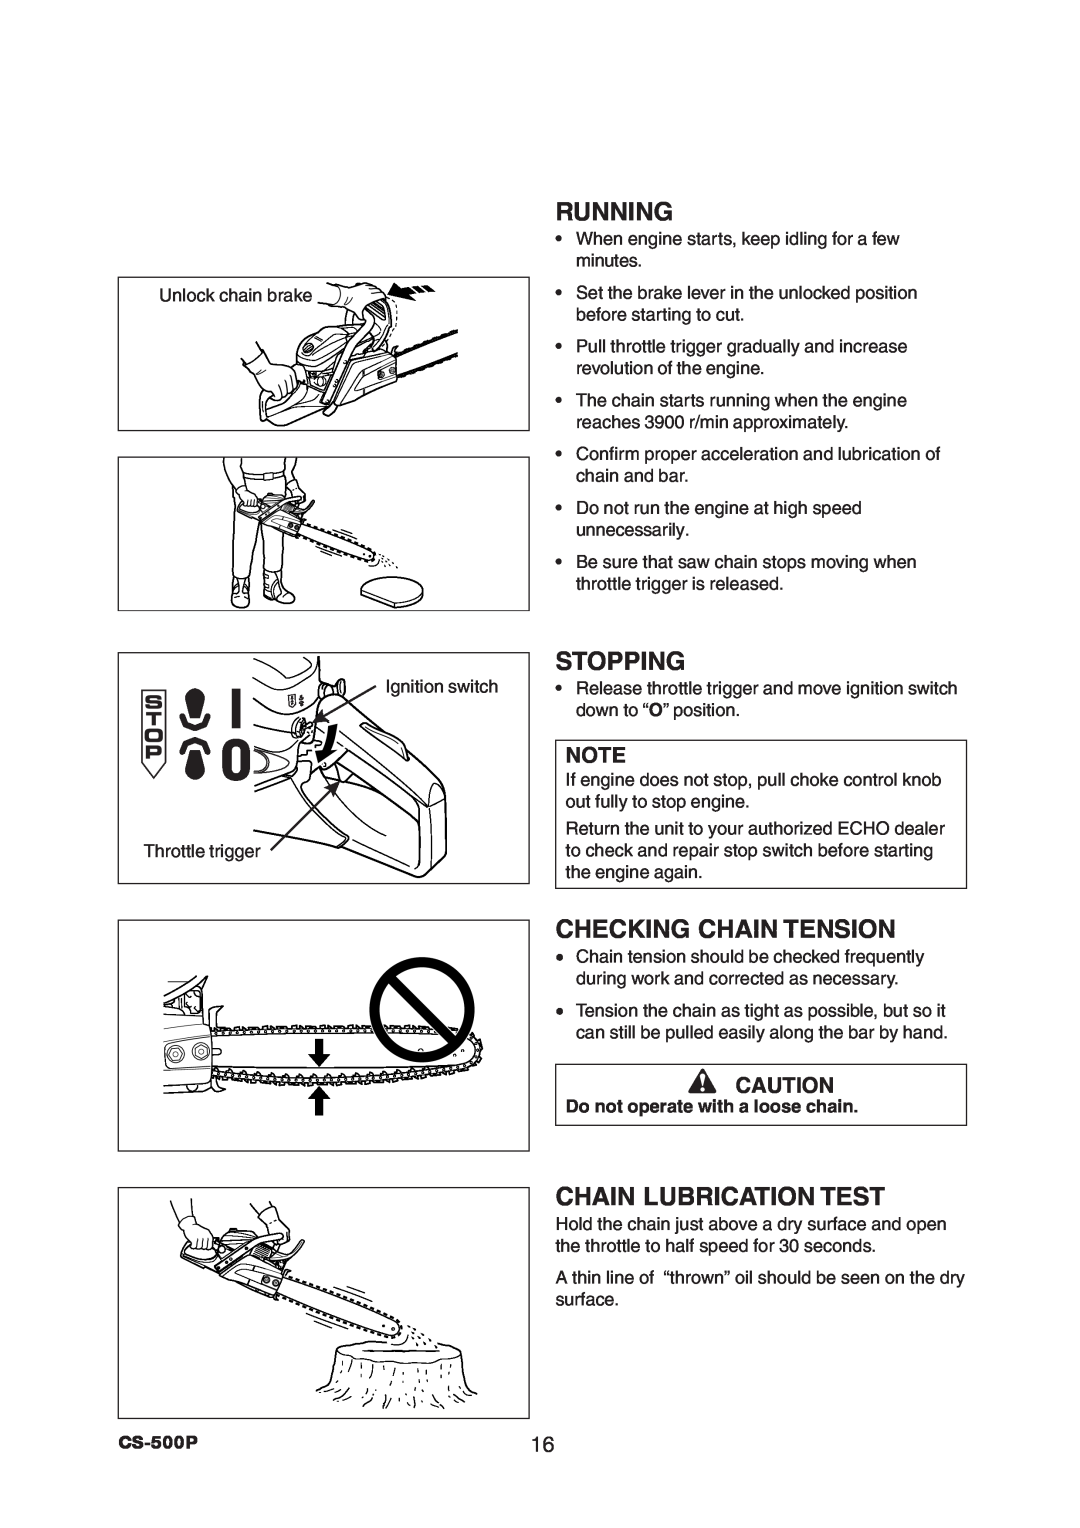 Echo CS-500P instruction manual Running, Stopping, Checking Chain Tension, Chain Lubrication Test 